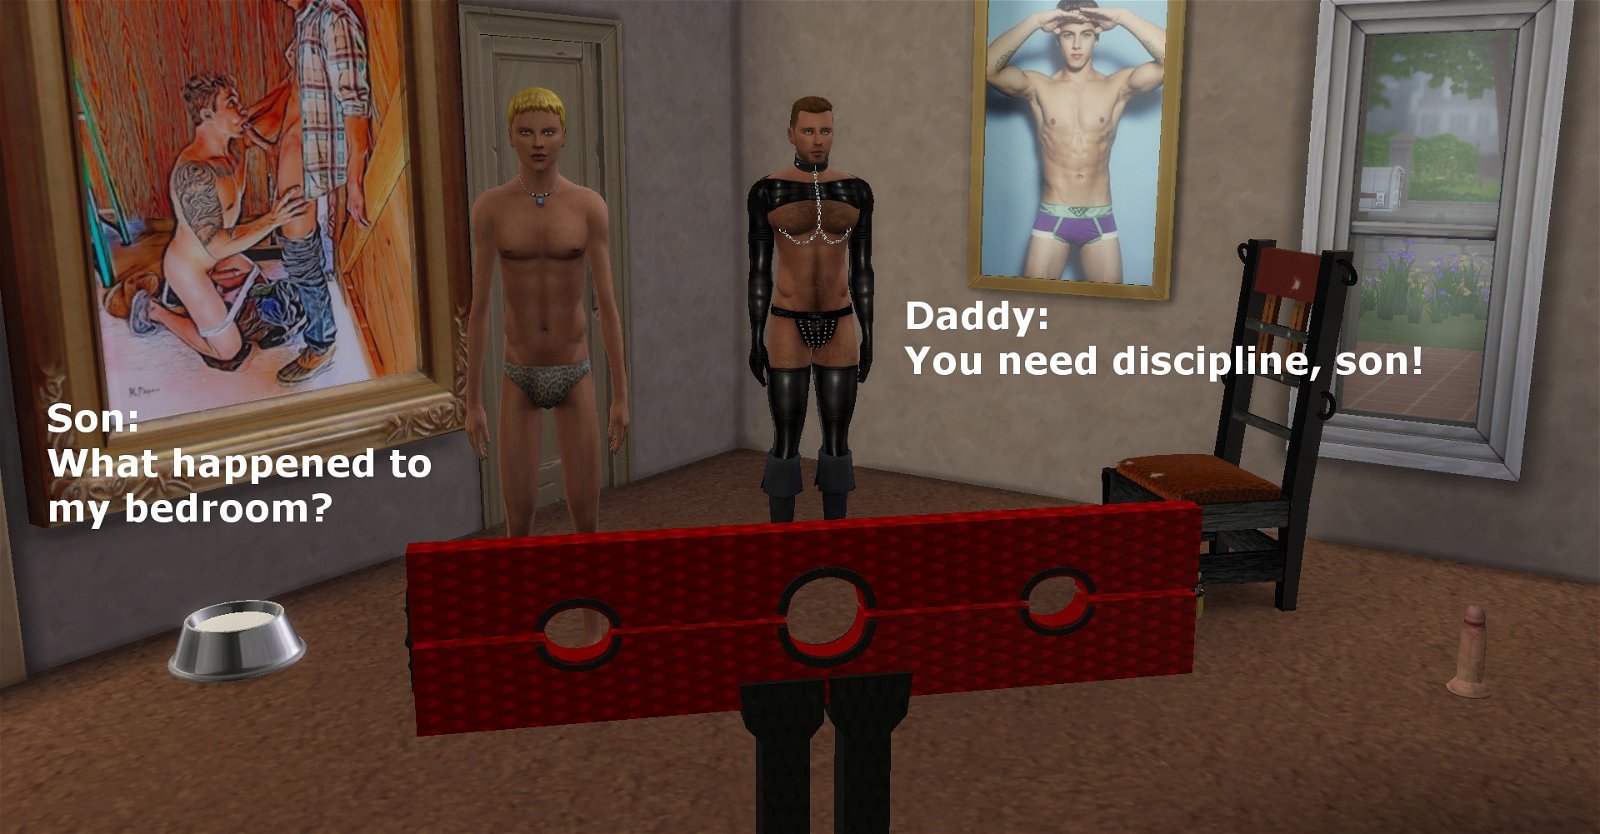 Photo by Sims4Men with the username @Sims4Men, who is a verified user,  December 31, 2018 at 11:49 AM. The post is about the topic Gay Incest and the text says 'Father & Son: Part 4'